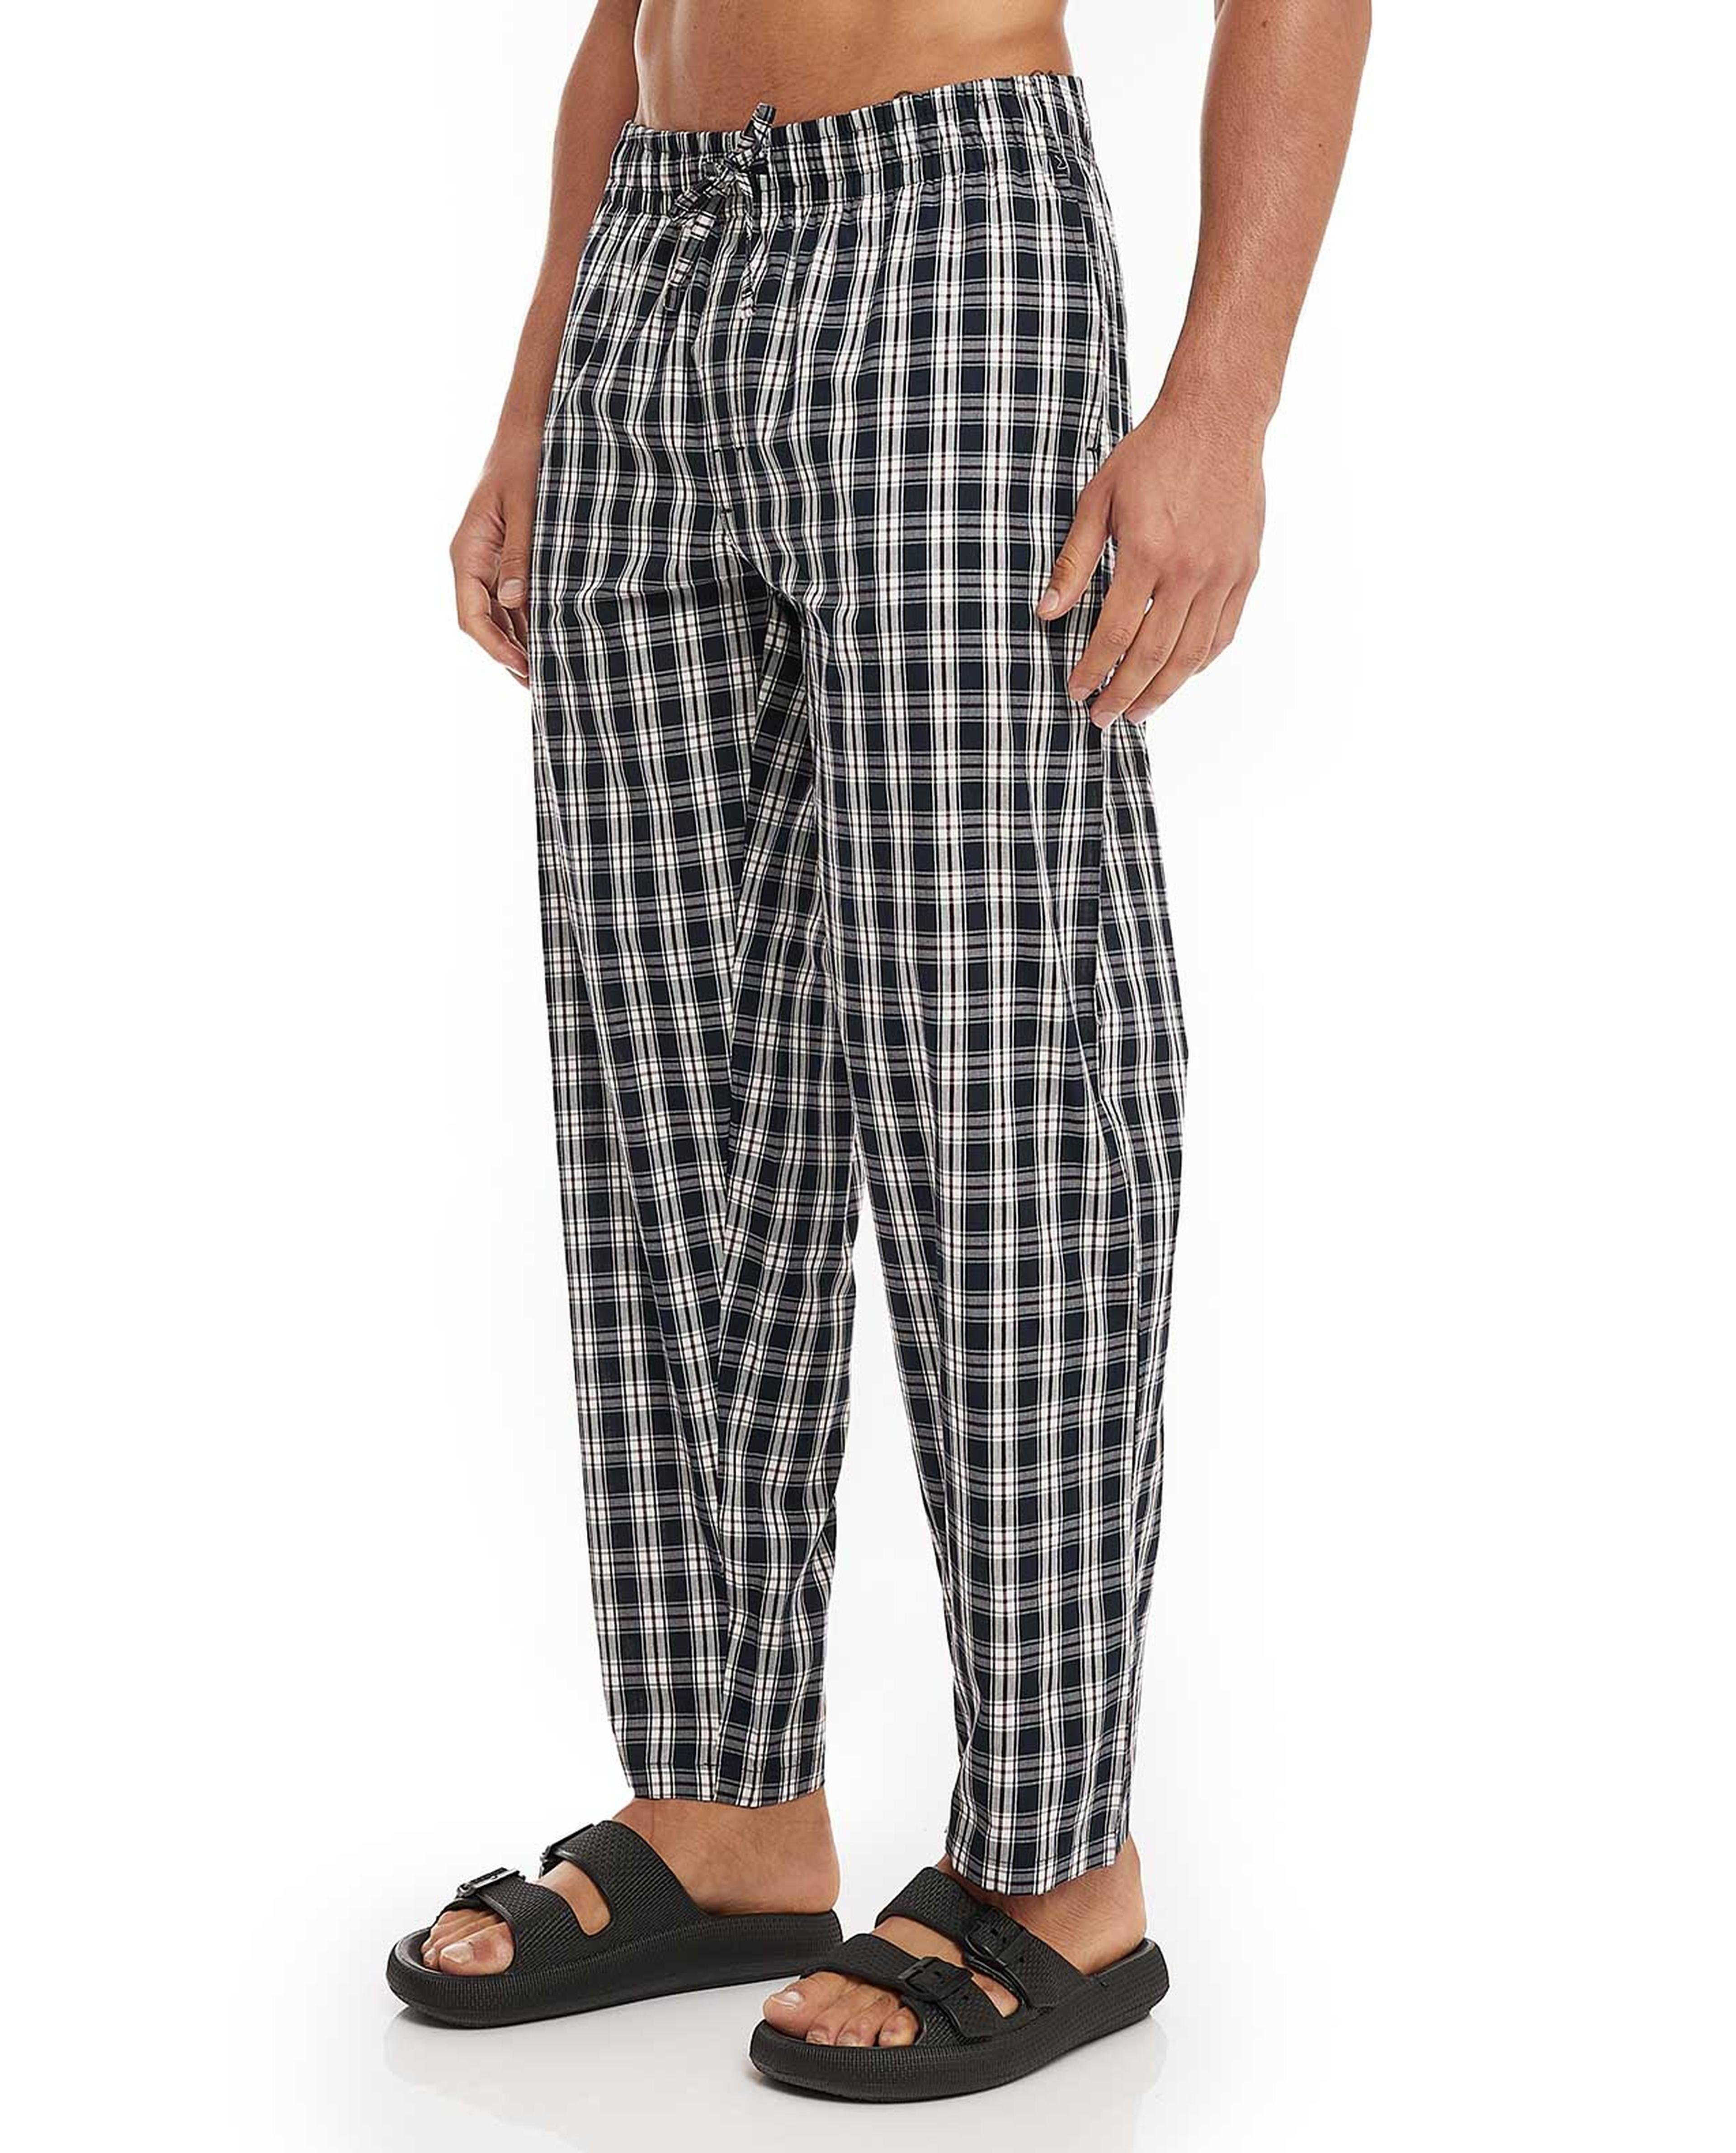 Checked Lounge Pants with Drawstring Waist